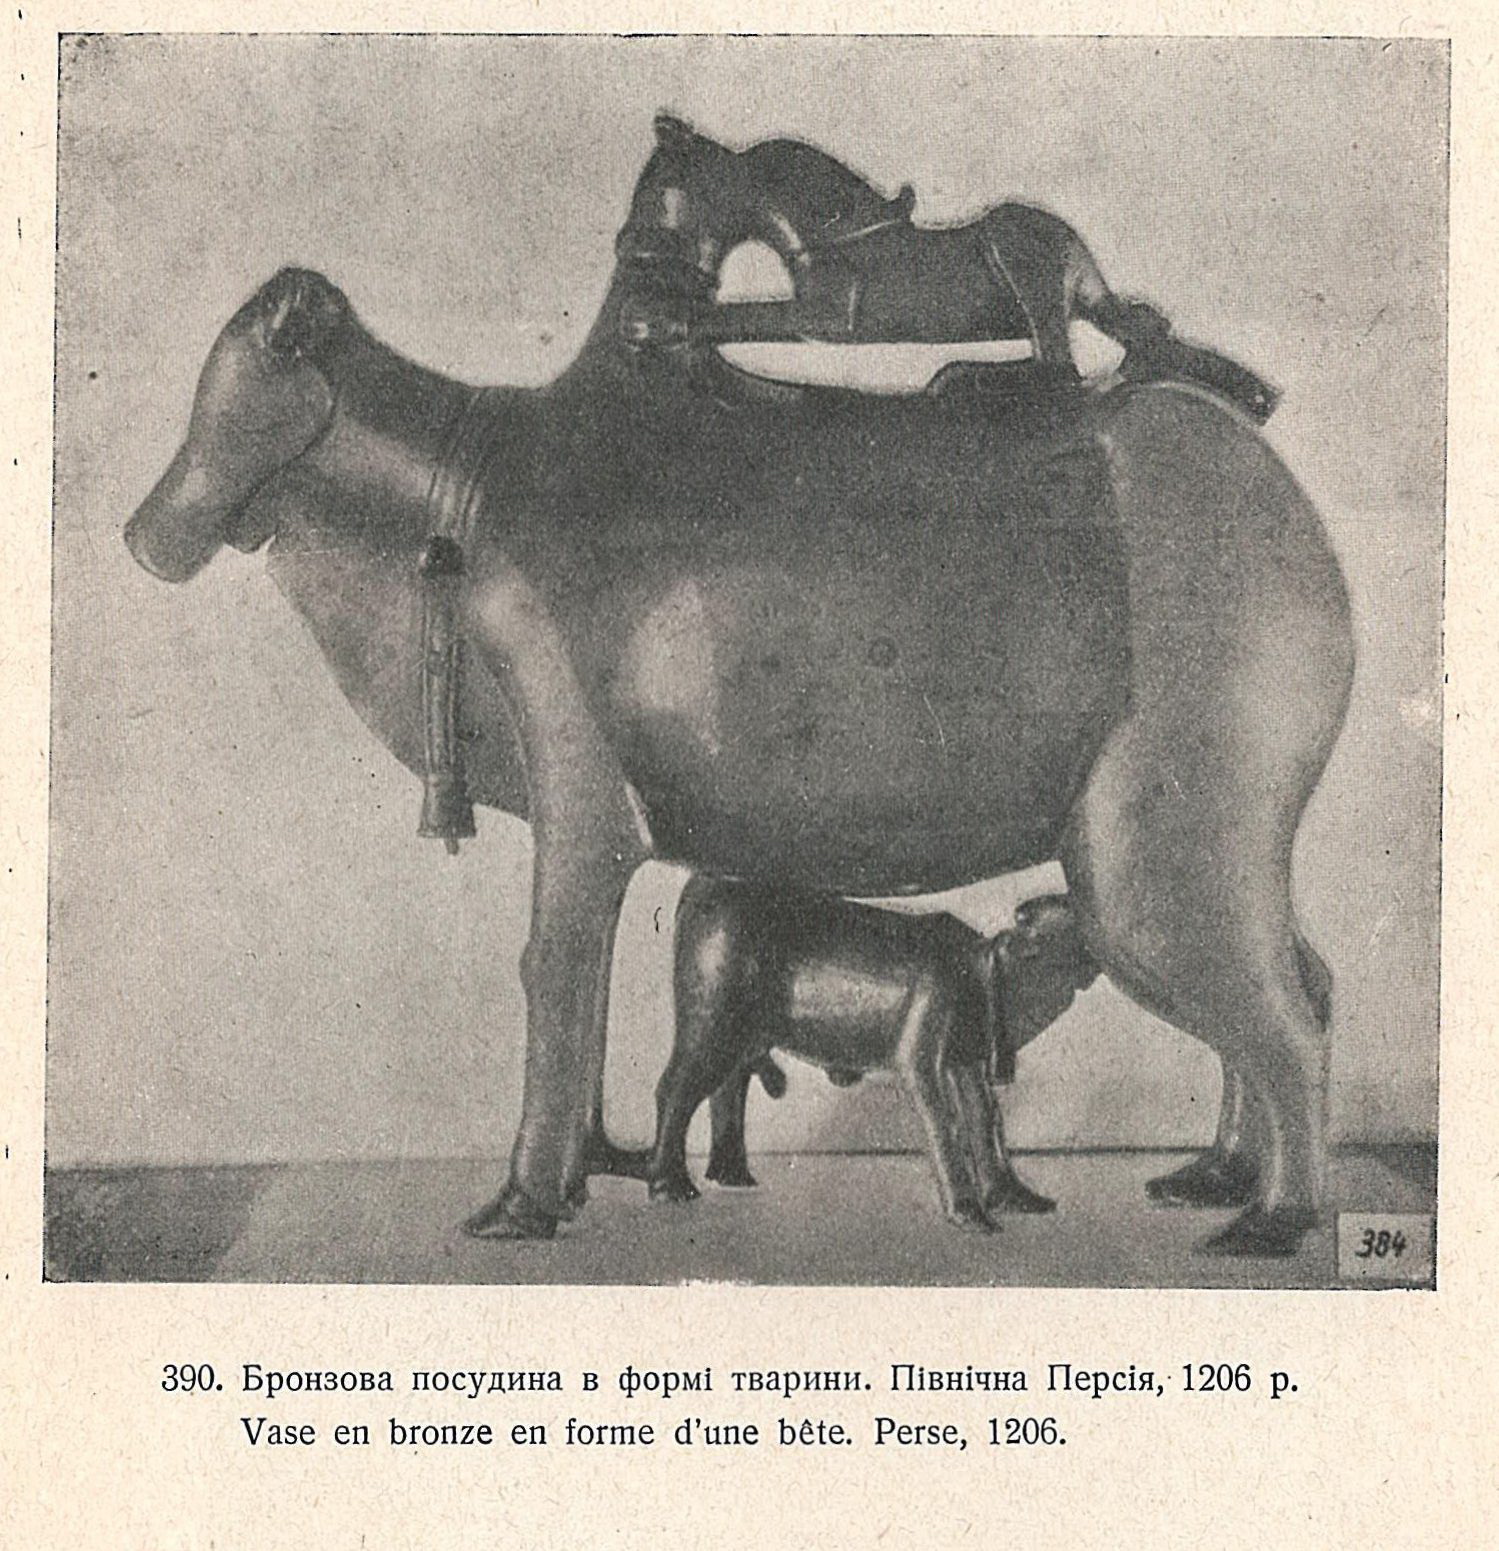 A unique Iranian Khanenkos' aquamanile of 1206, forcefully taken from the Kyiv museum in 1930 and transferred to the State Hermitage (Russian Federation).